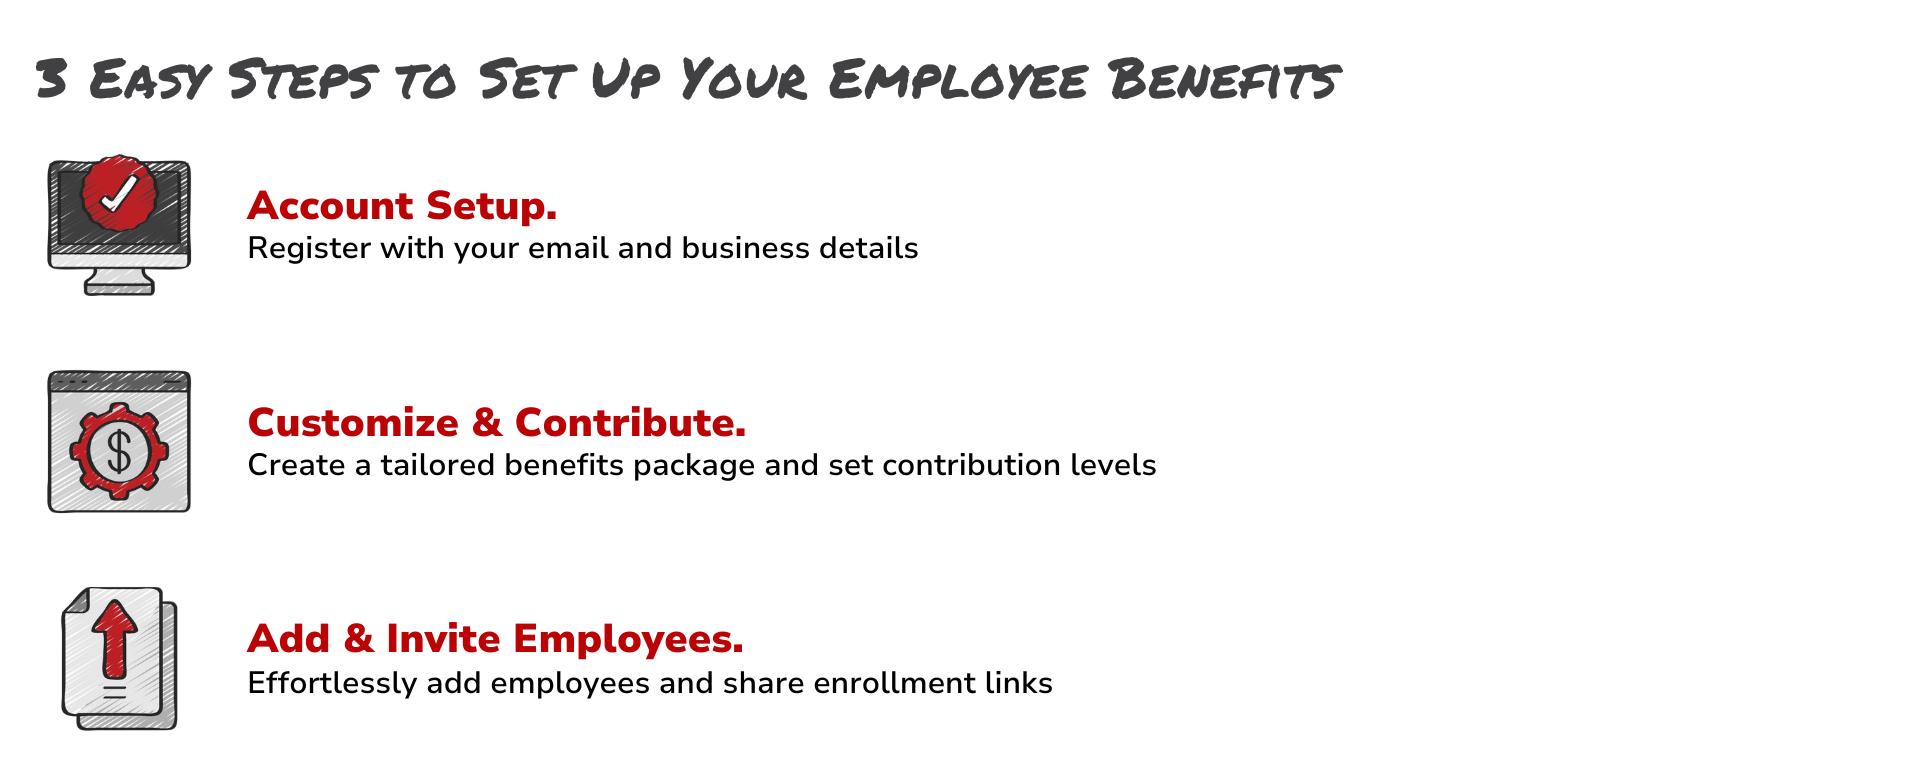 three easy steps to set up your employee benefits are shown